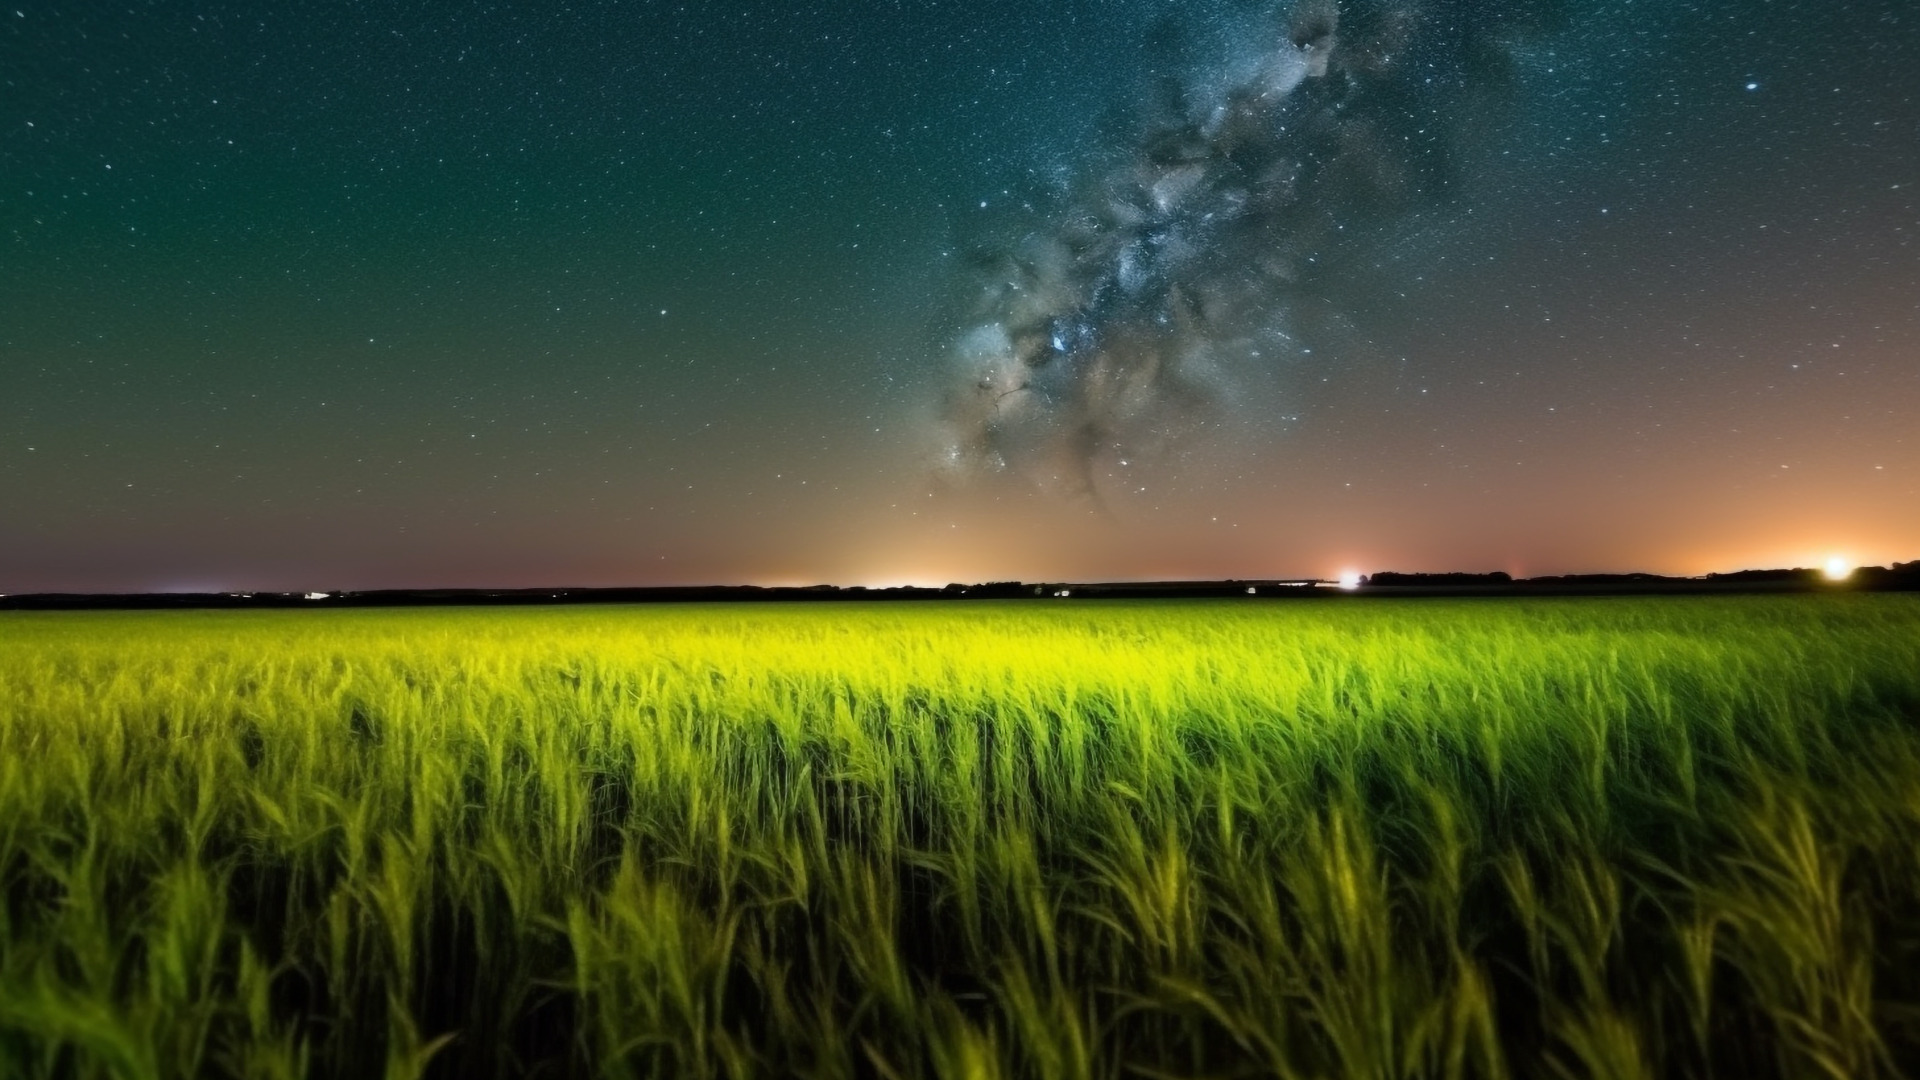 Download wallpaper star, way, milky, illuminates, section landscapes in ...